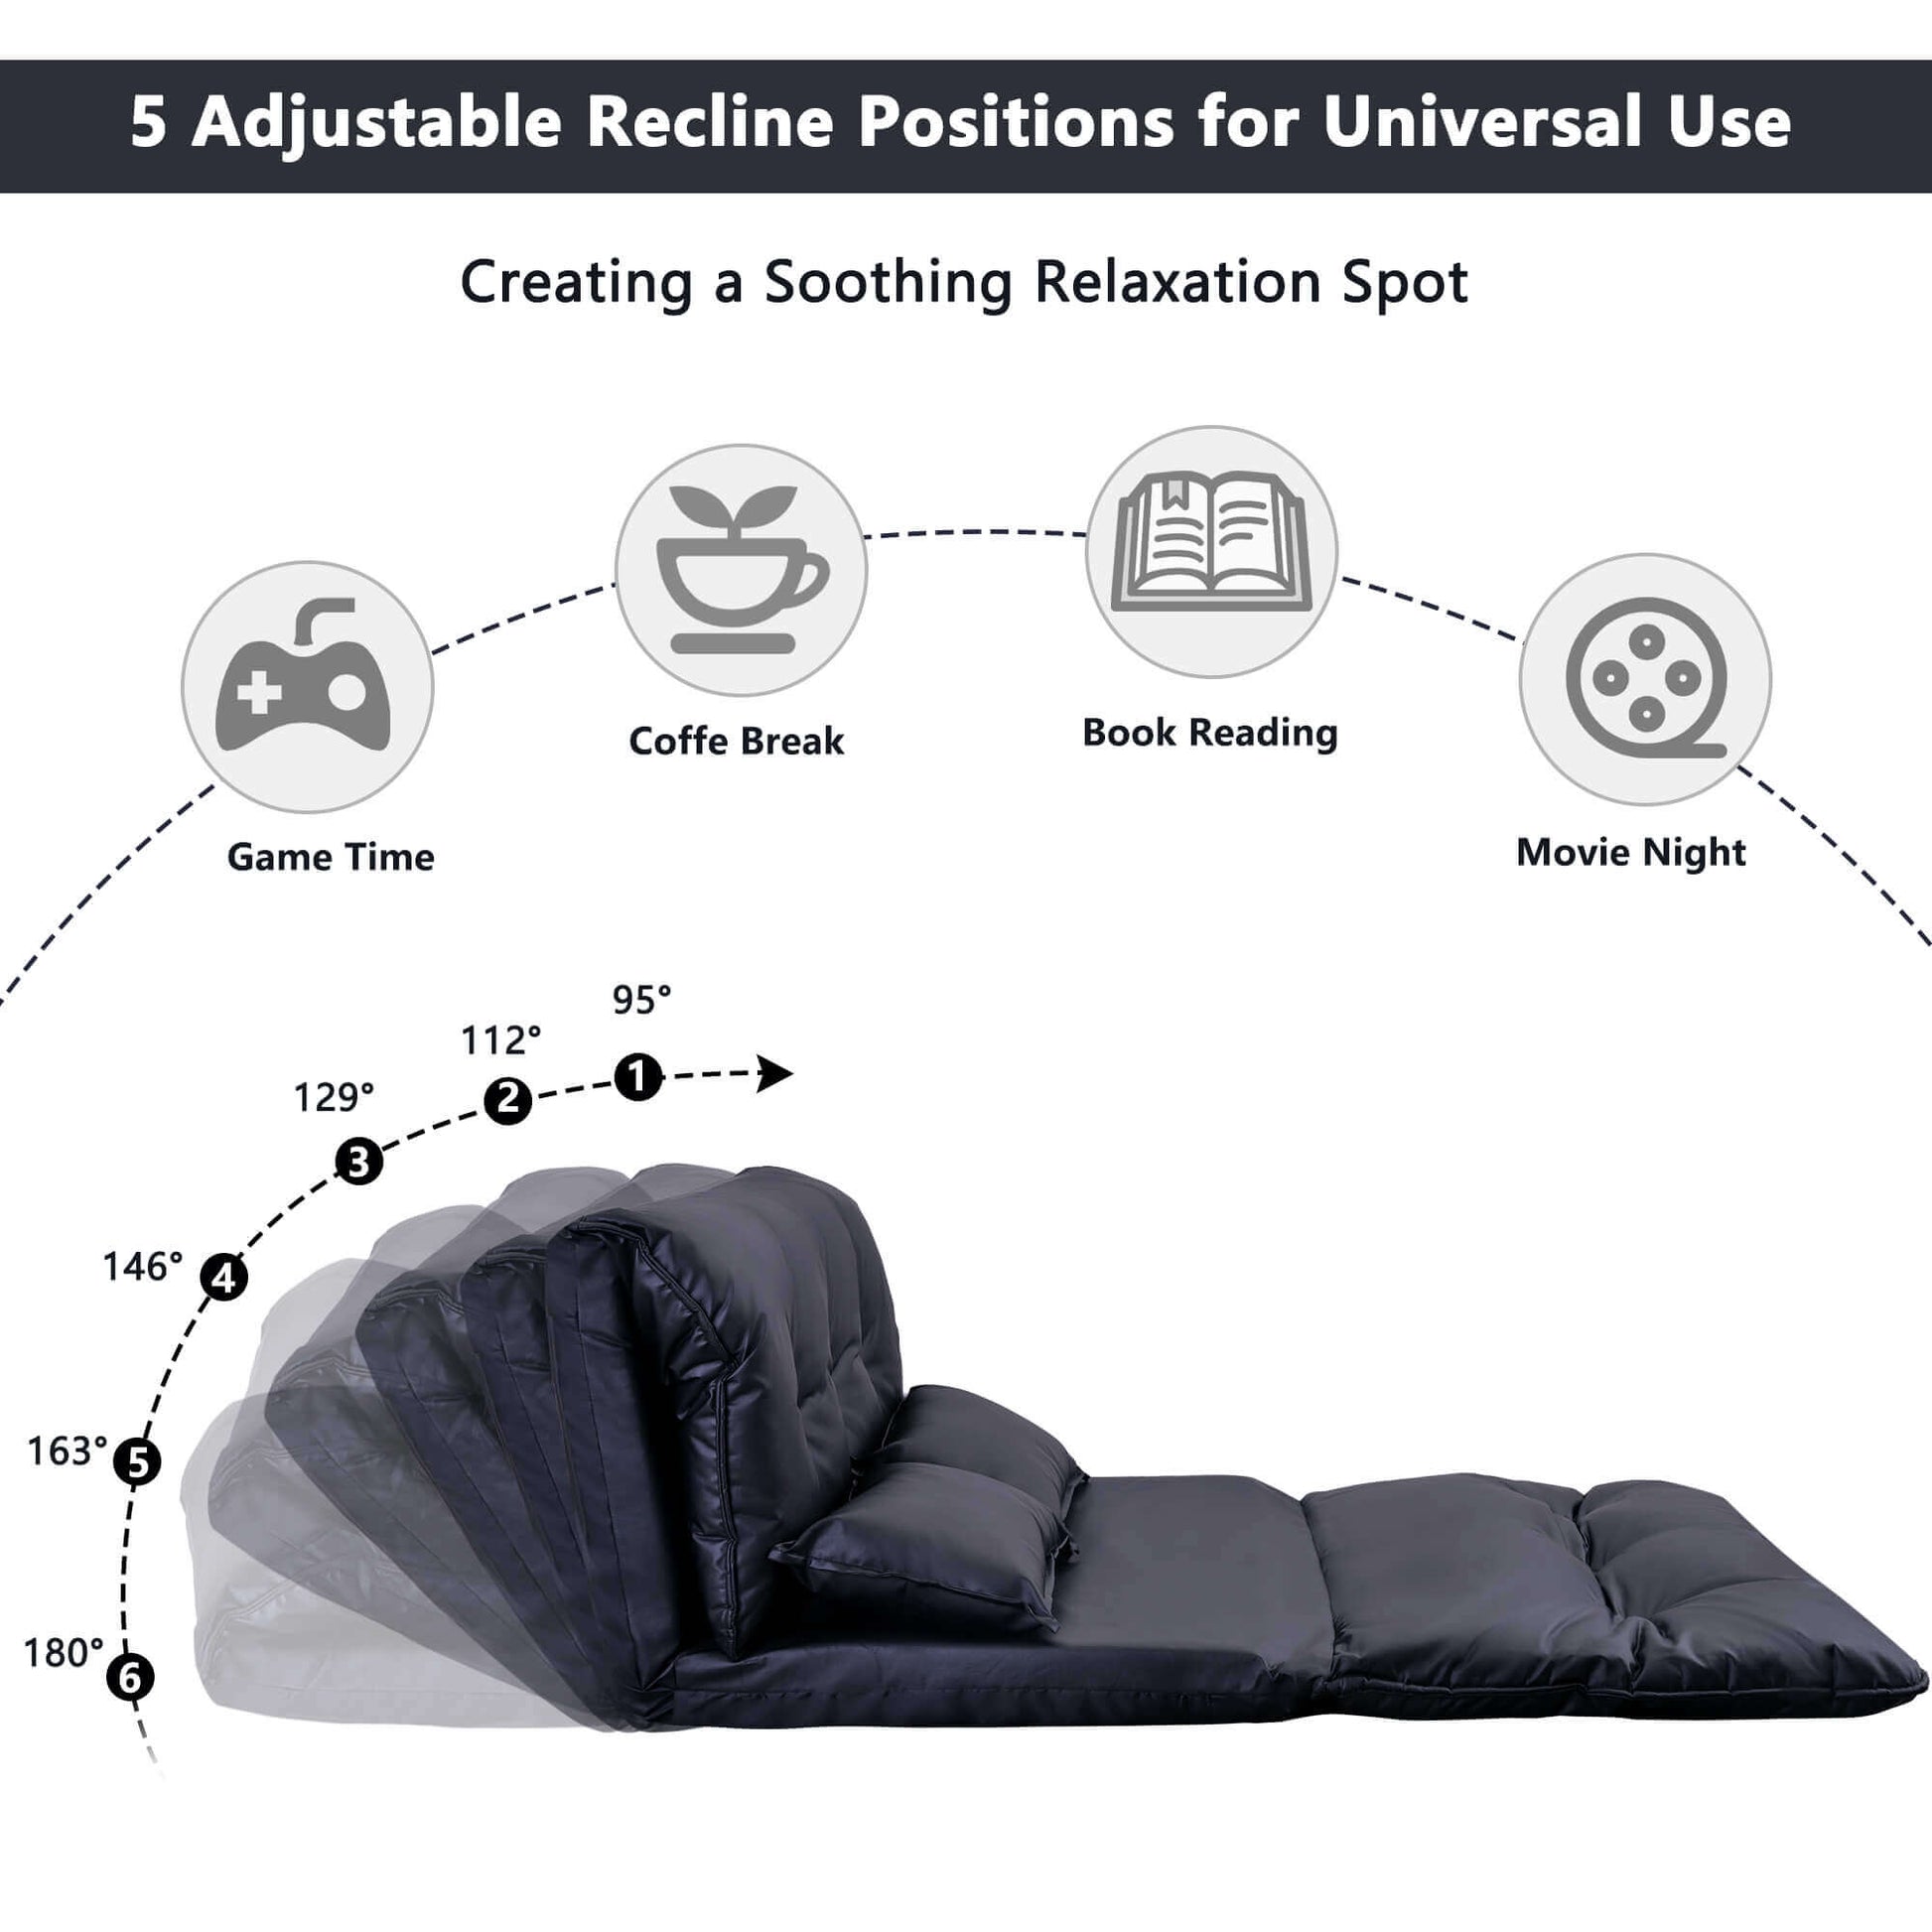 Convertible Floor Sofa Chair / Folding Upholstered Couch Bed / Adjustable Futon Sleeper Sofa with Two Pillows, Black